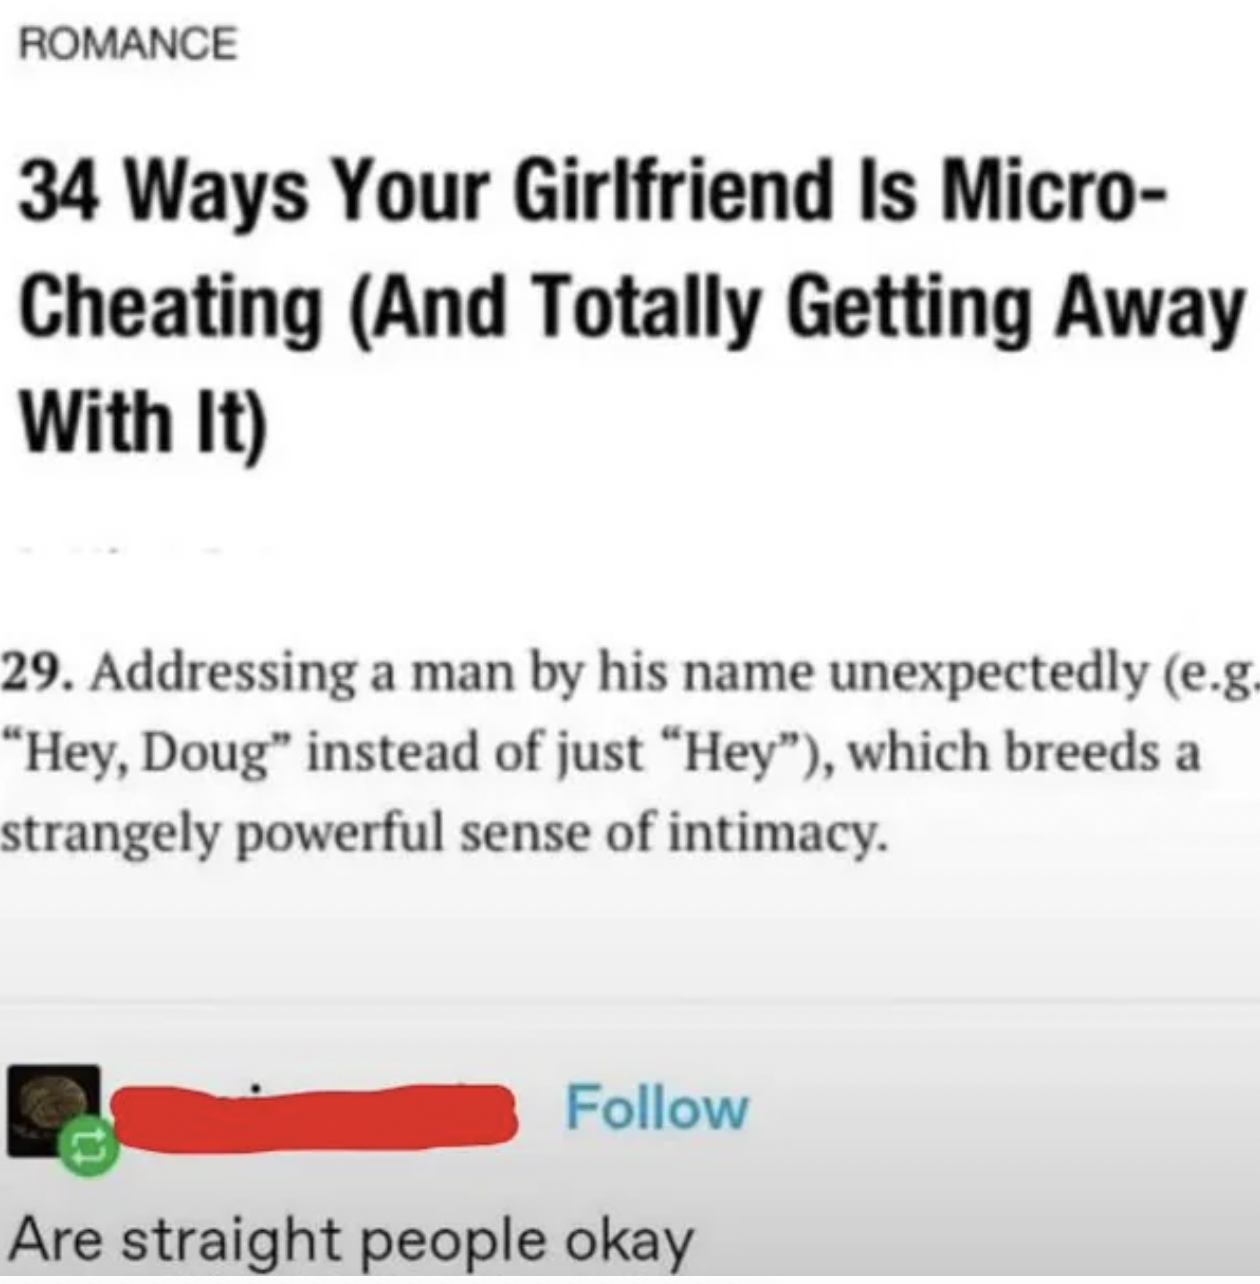 Facepalms - micro cheating meme - Romance 34 Ways Your Girlfriend Is Micro Cheating And Totally Getting Away With It 29. Addressing a man by his name unexpectedly e.g.